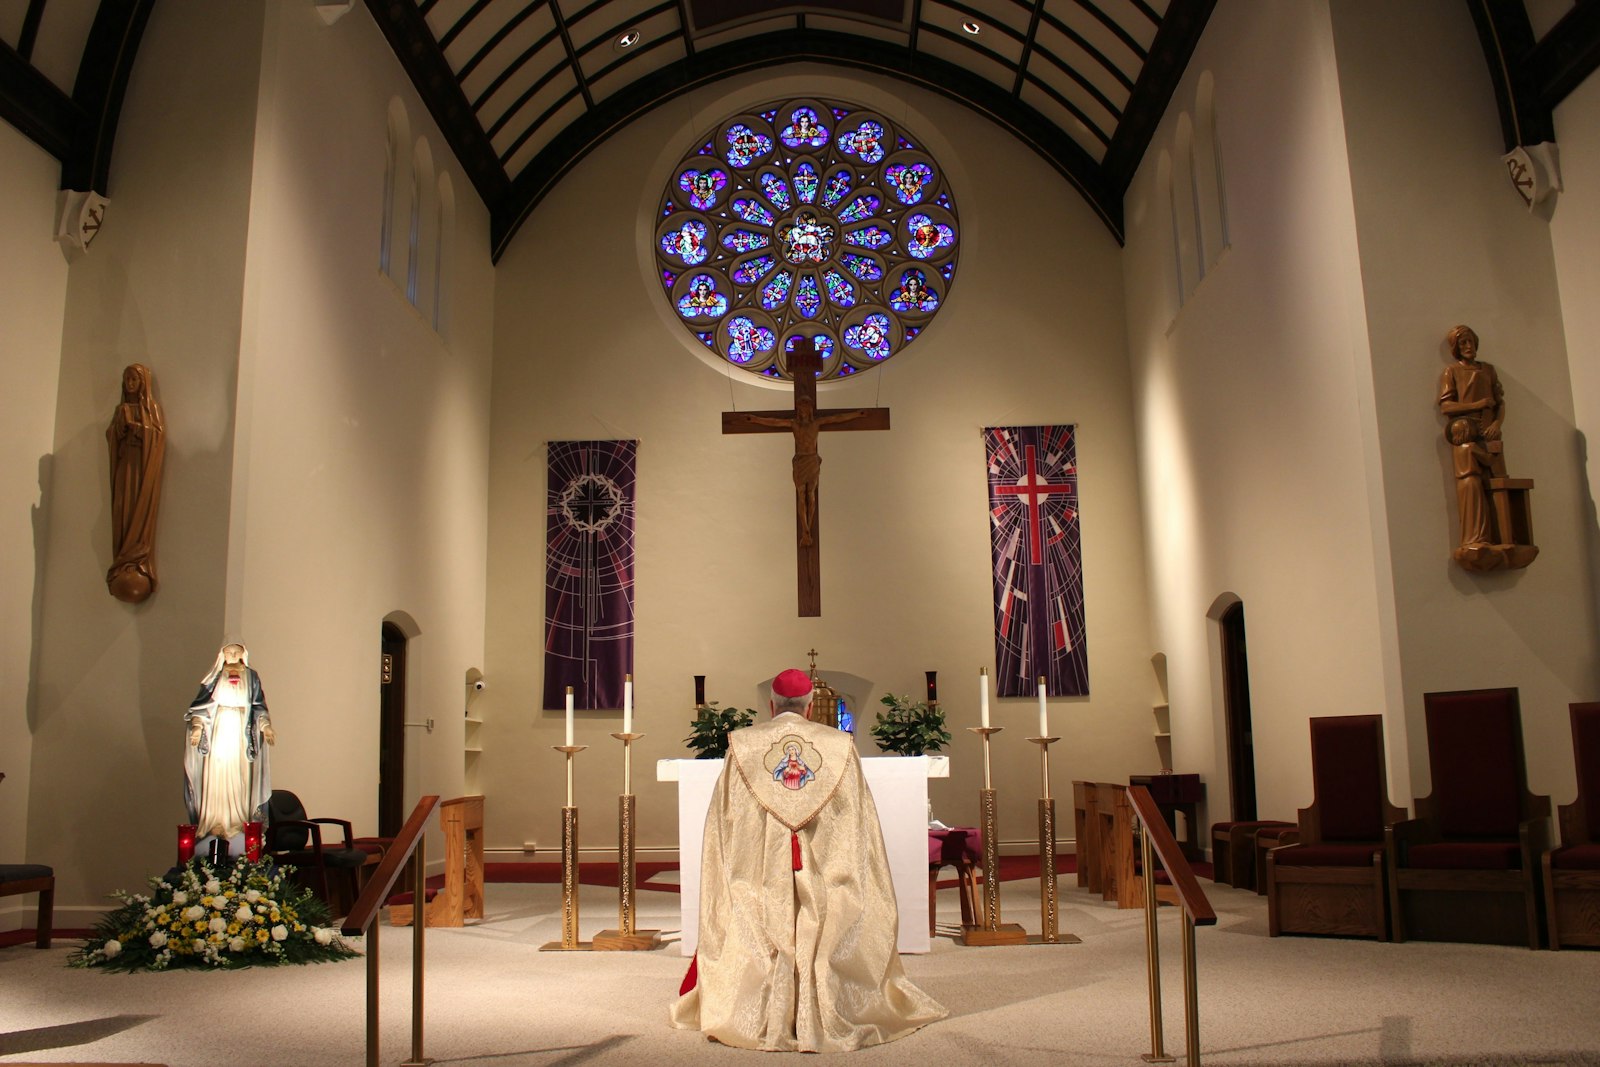 Bishop Monforton prays before the Blessed Sacrament at St. Agnes Church in Mingo Junction, Ohio. The bishop said he begins every morning with a holy hour, which is a chance for him to center his day on Jesus.